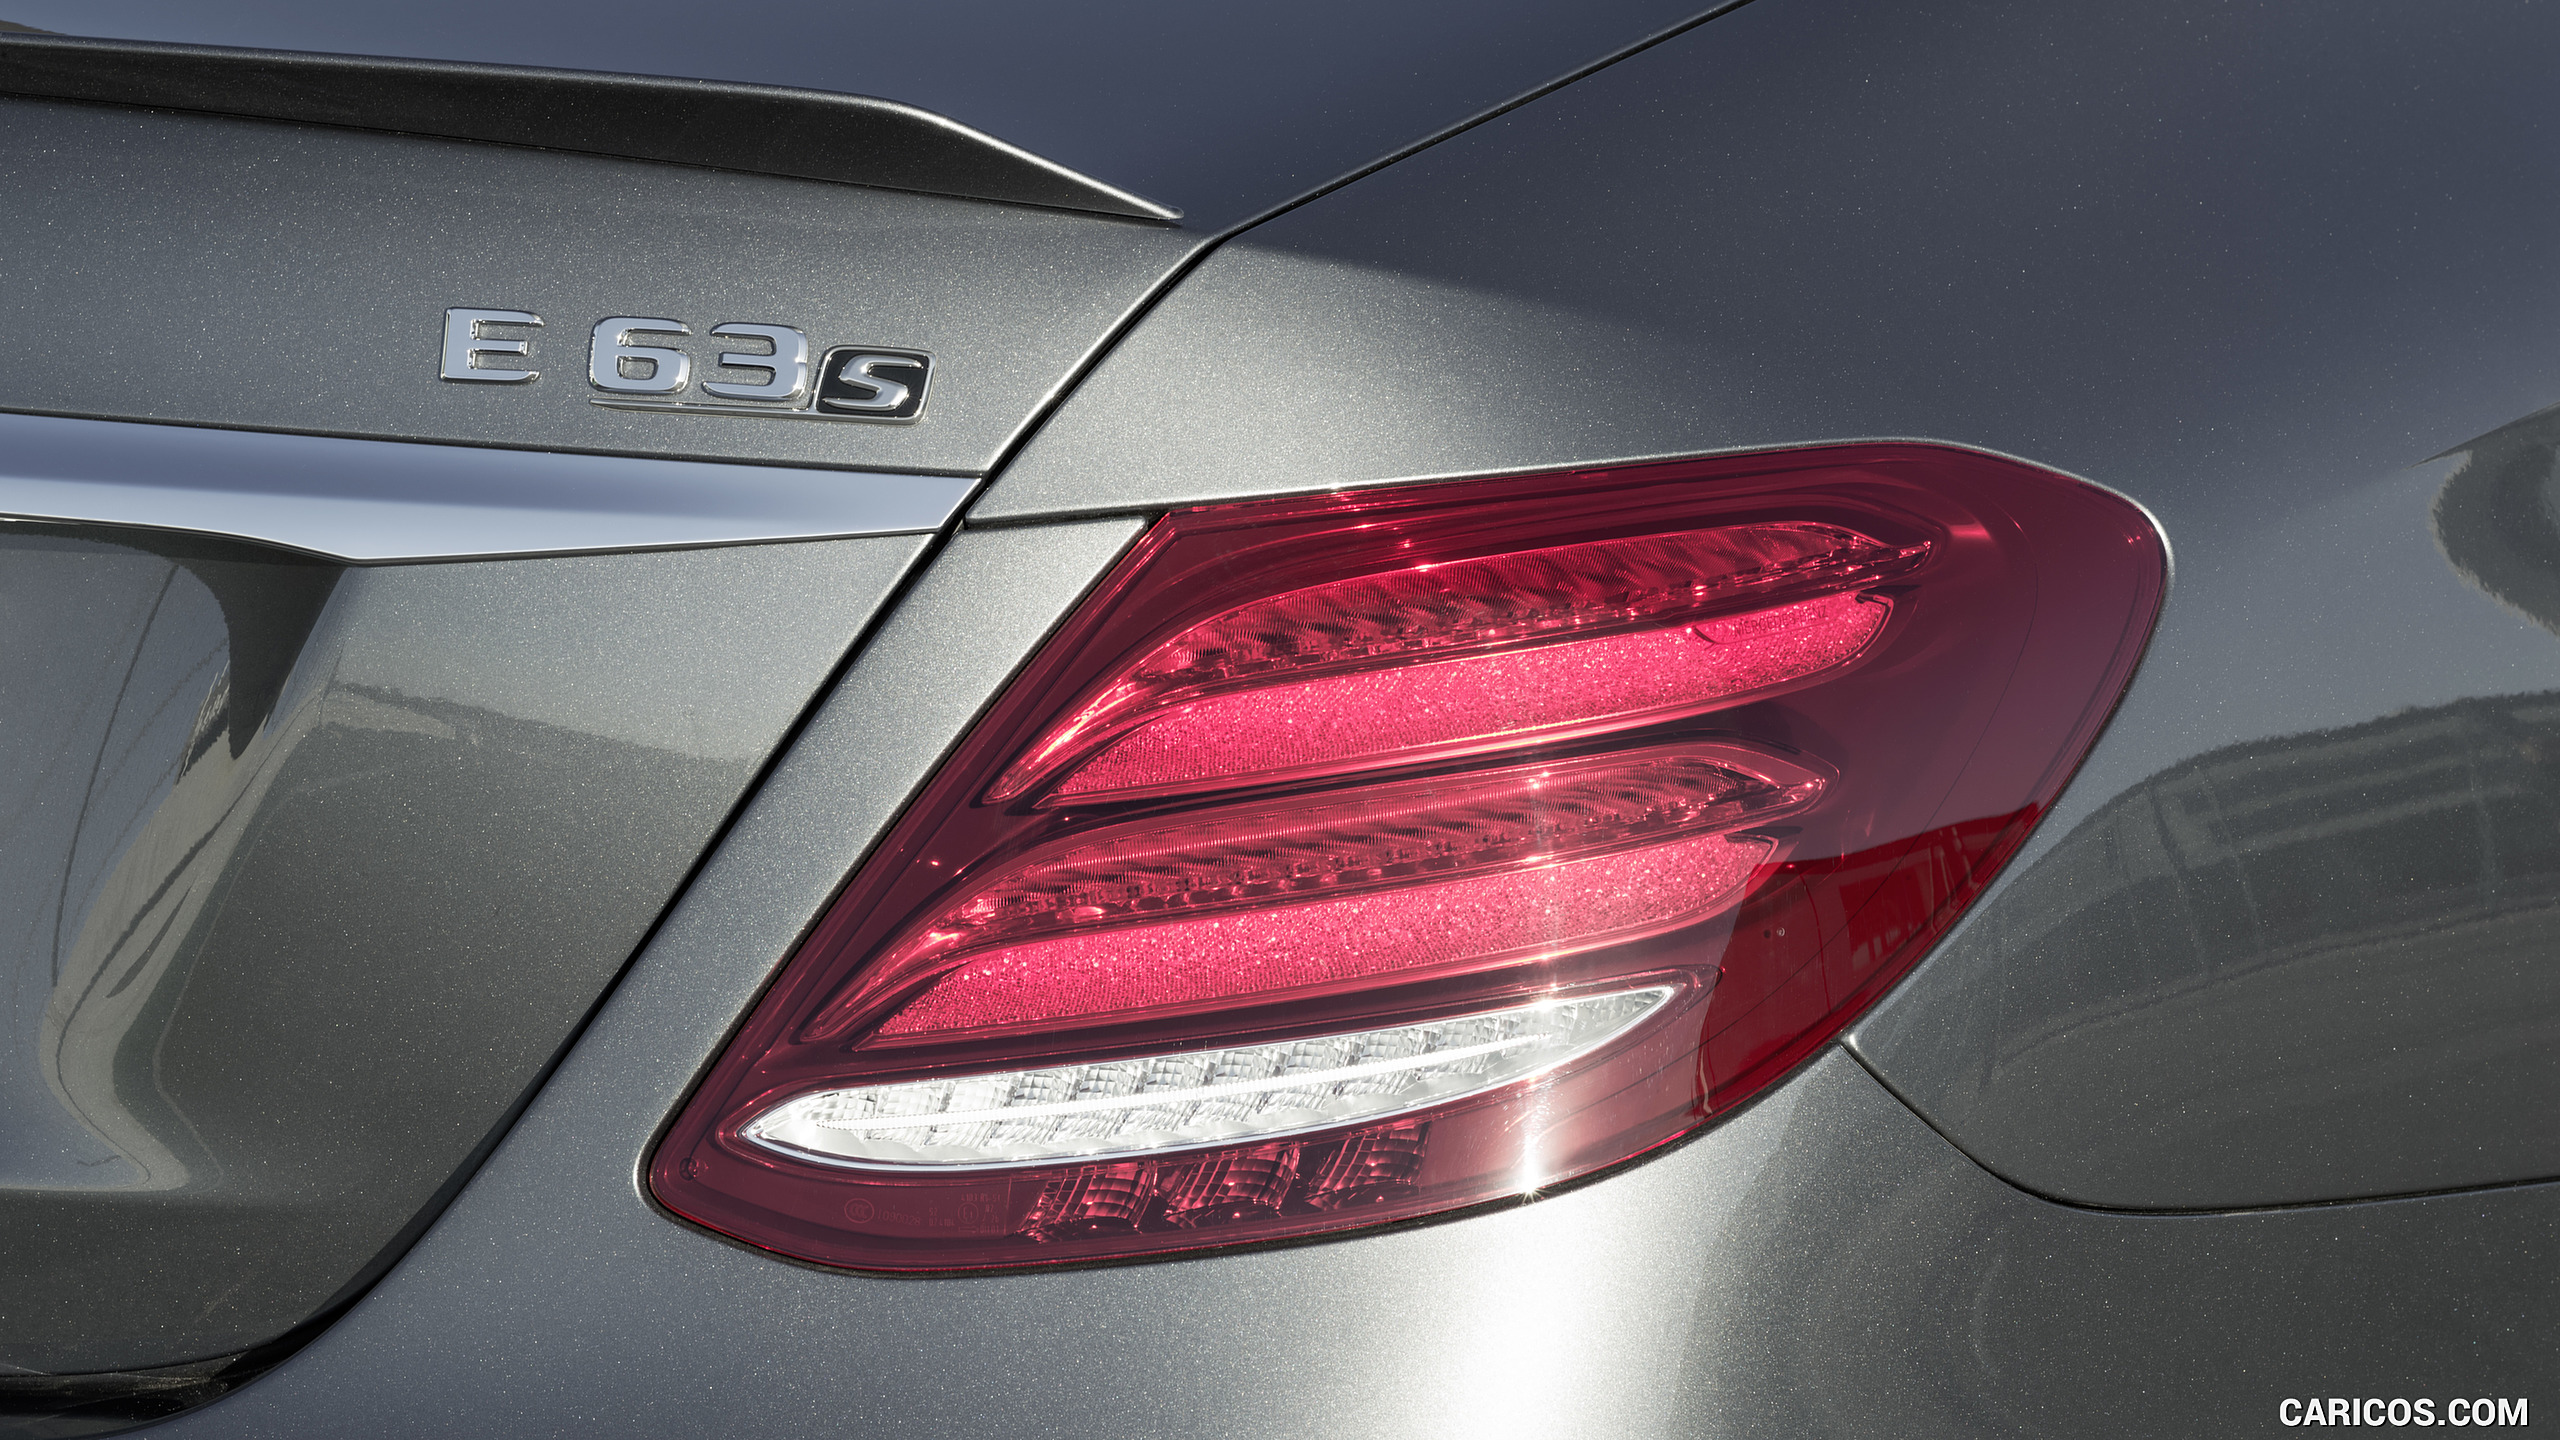 2018 Mercedes-AMG E63 S 4MATIC+ - Tail Light, #29 of 323